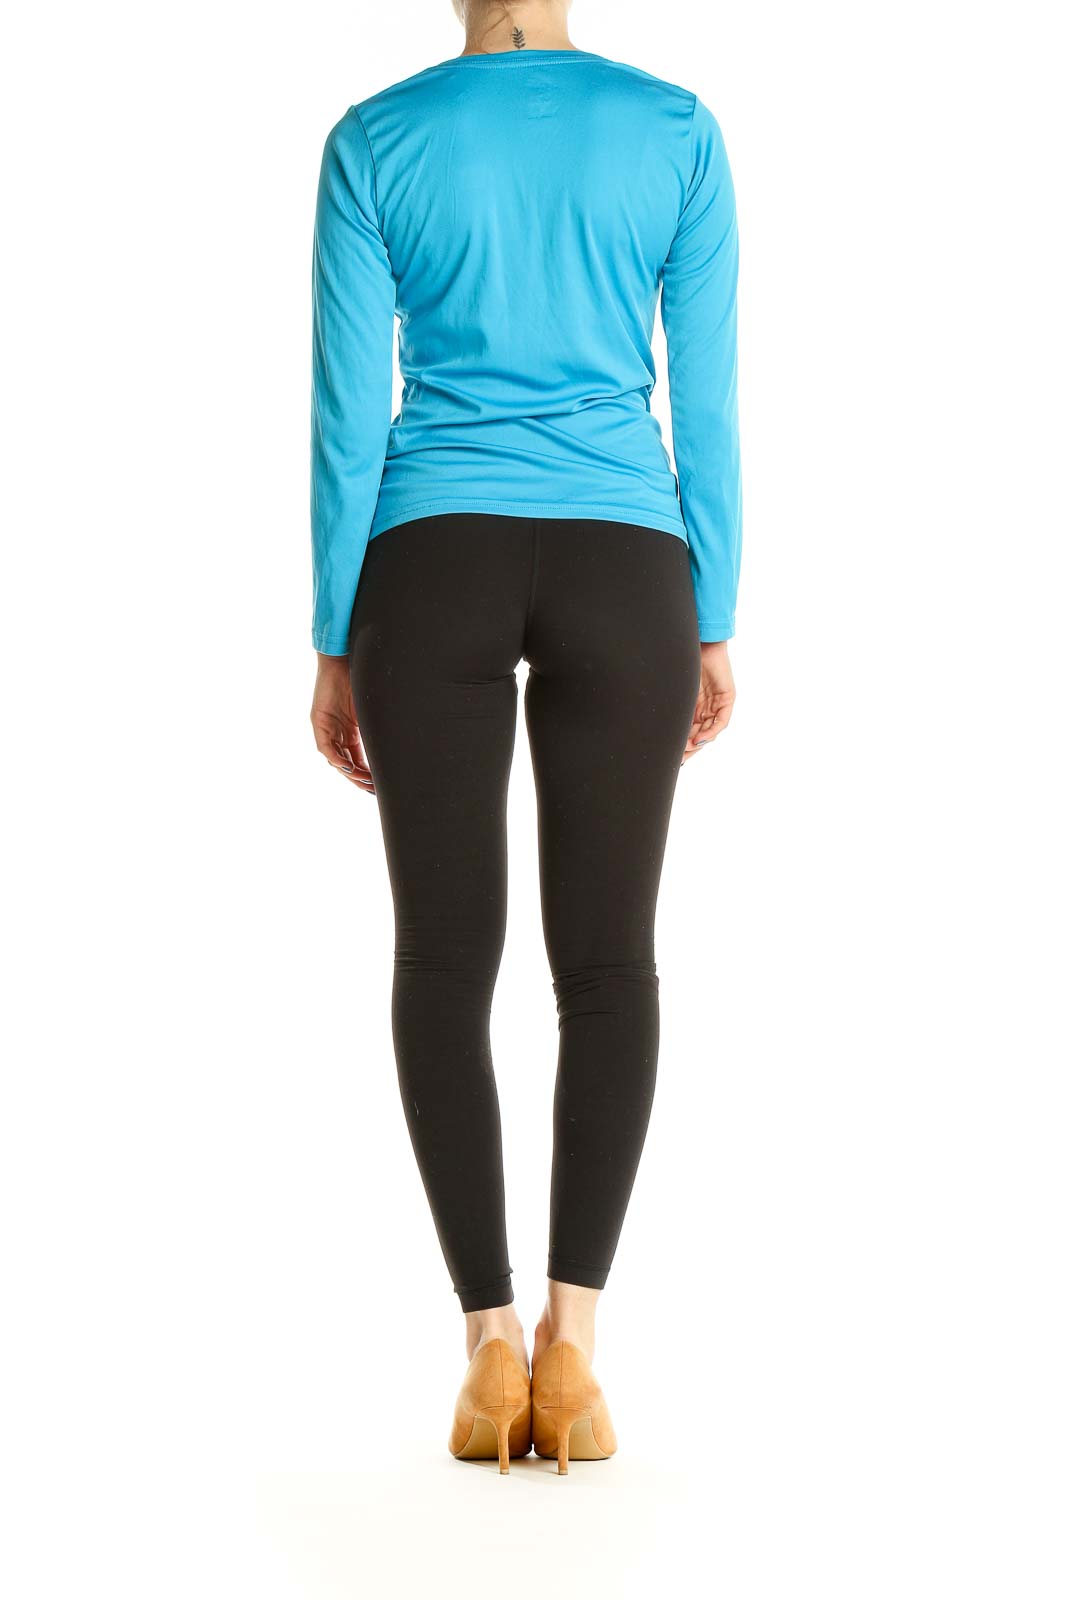 Avia - Blue Activewear Top Unknown